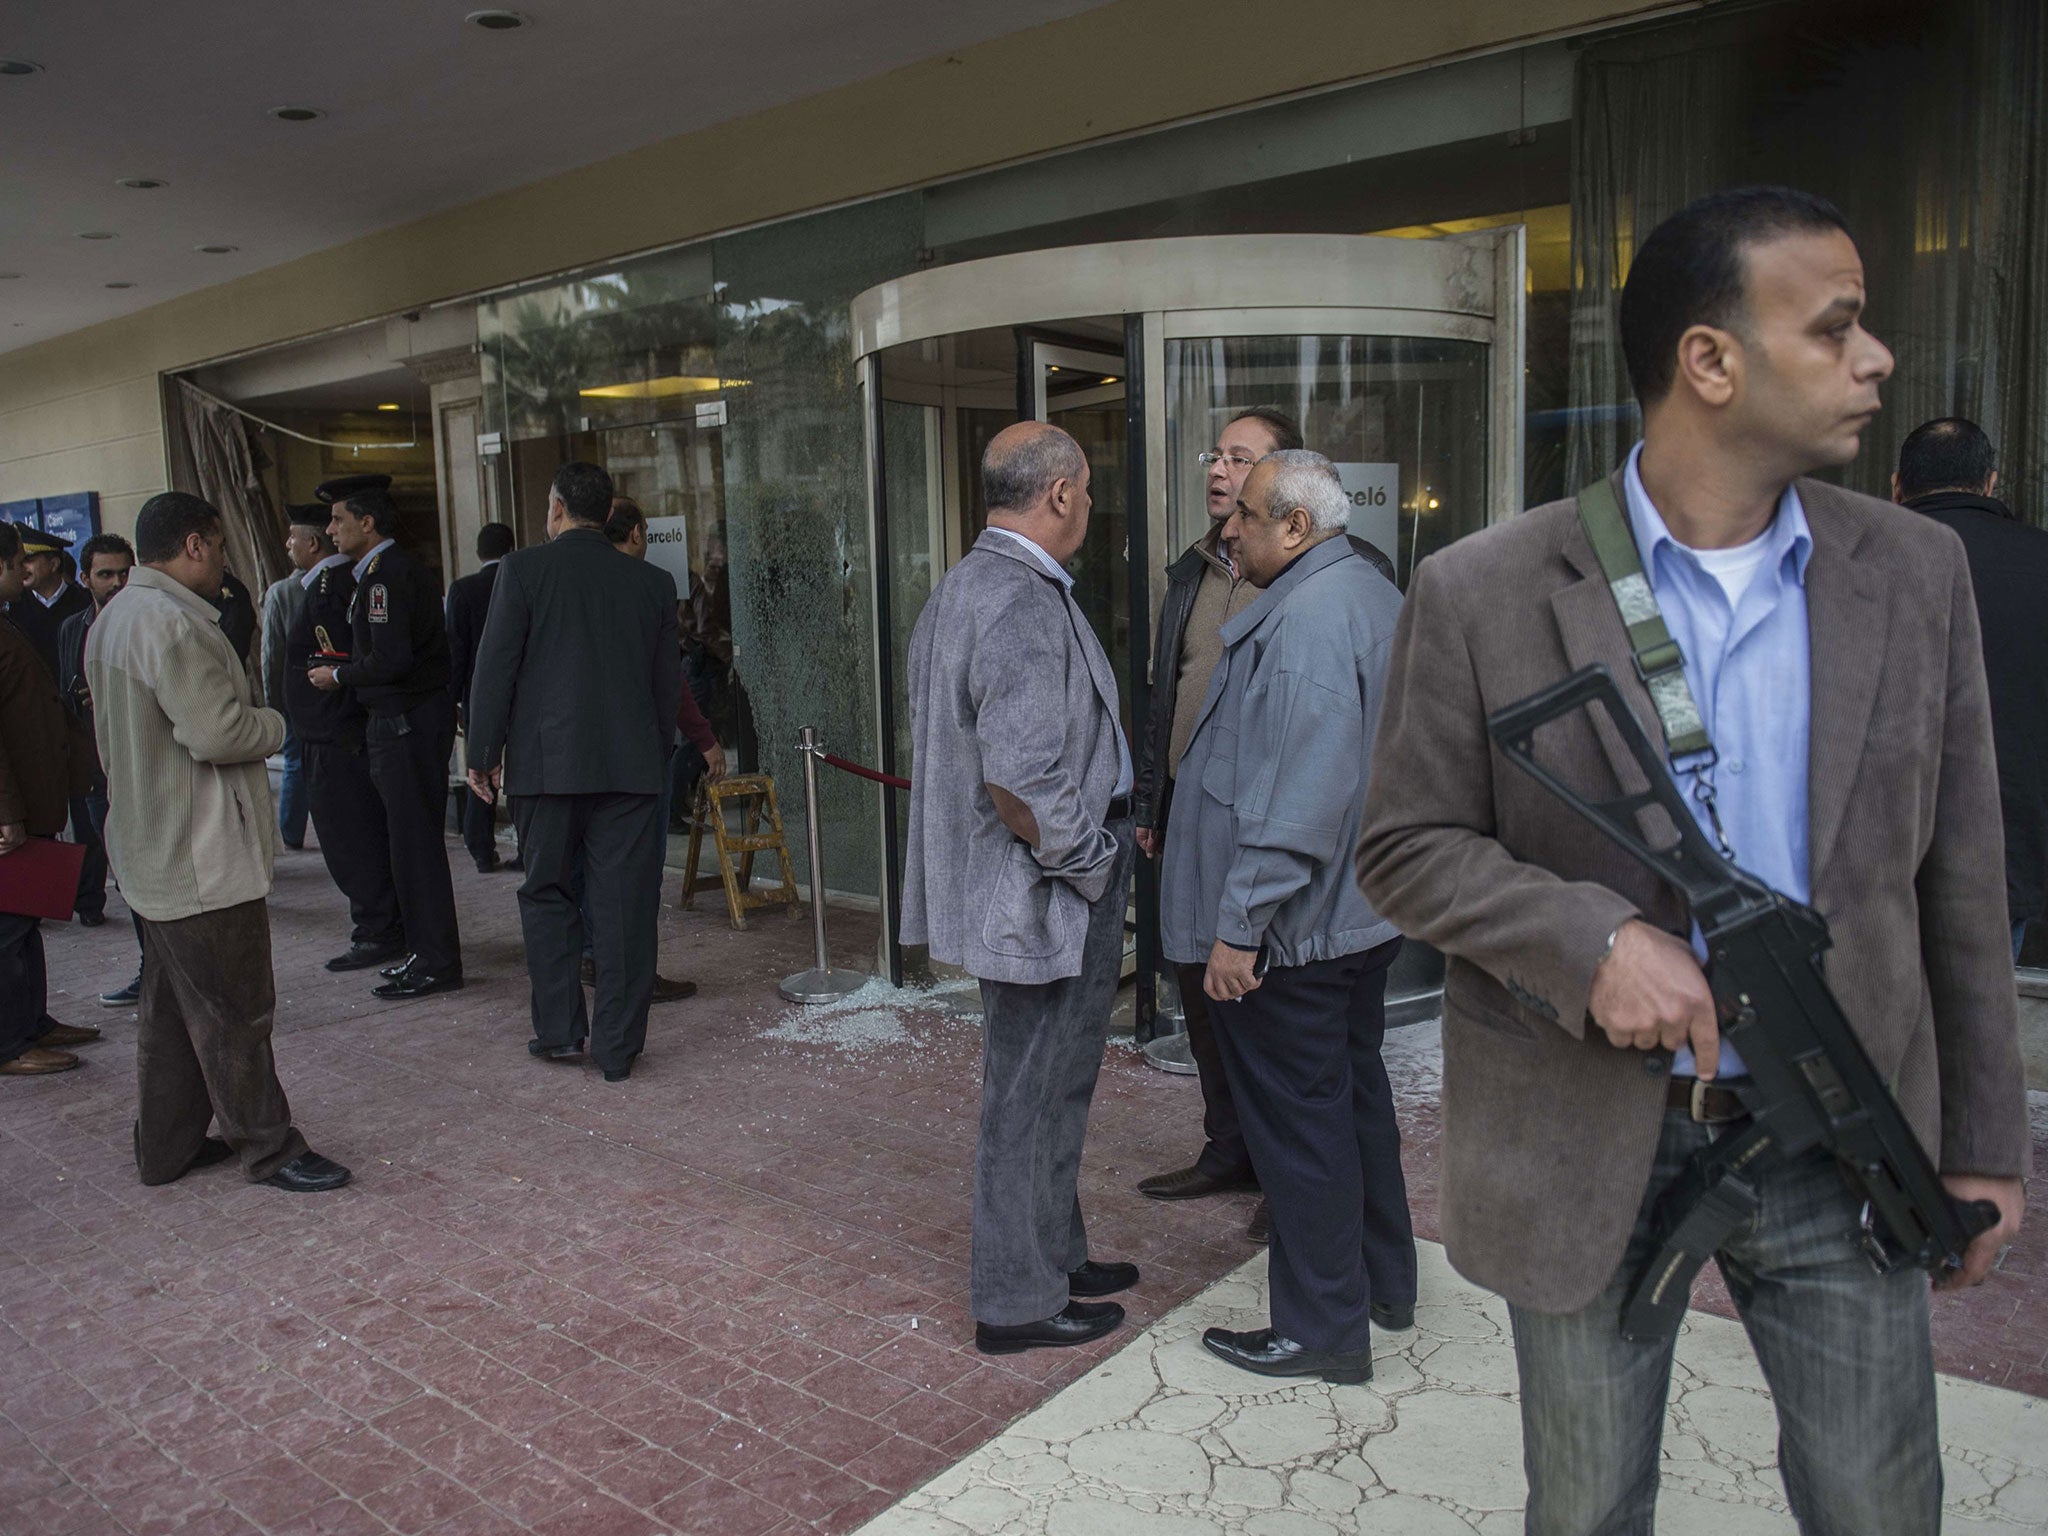 Egyptian security forces stand at the entrance of the Three Pyramids hotel in Cairo's al-Harm district on January 7, 2016